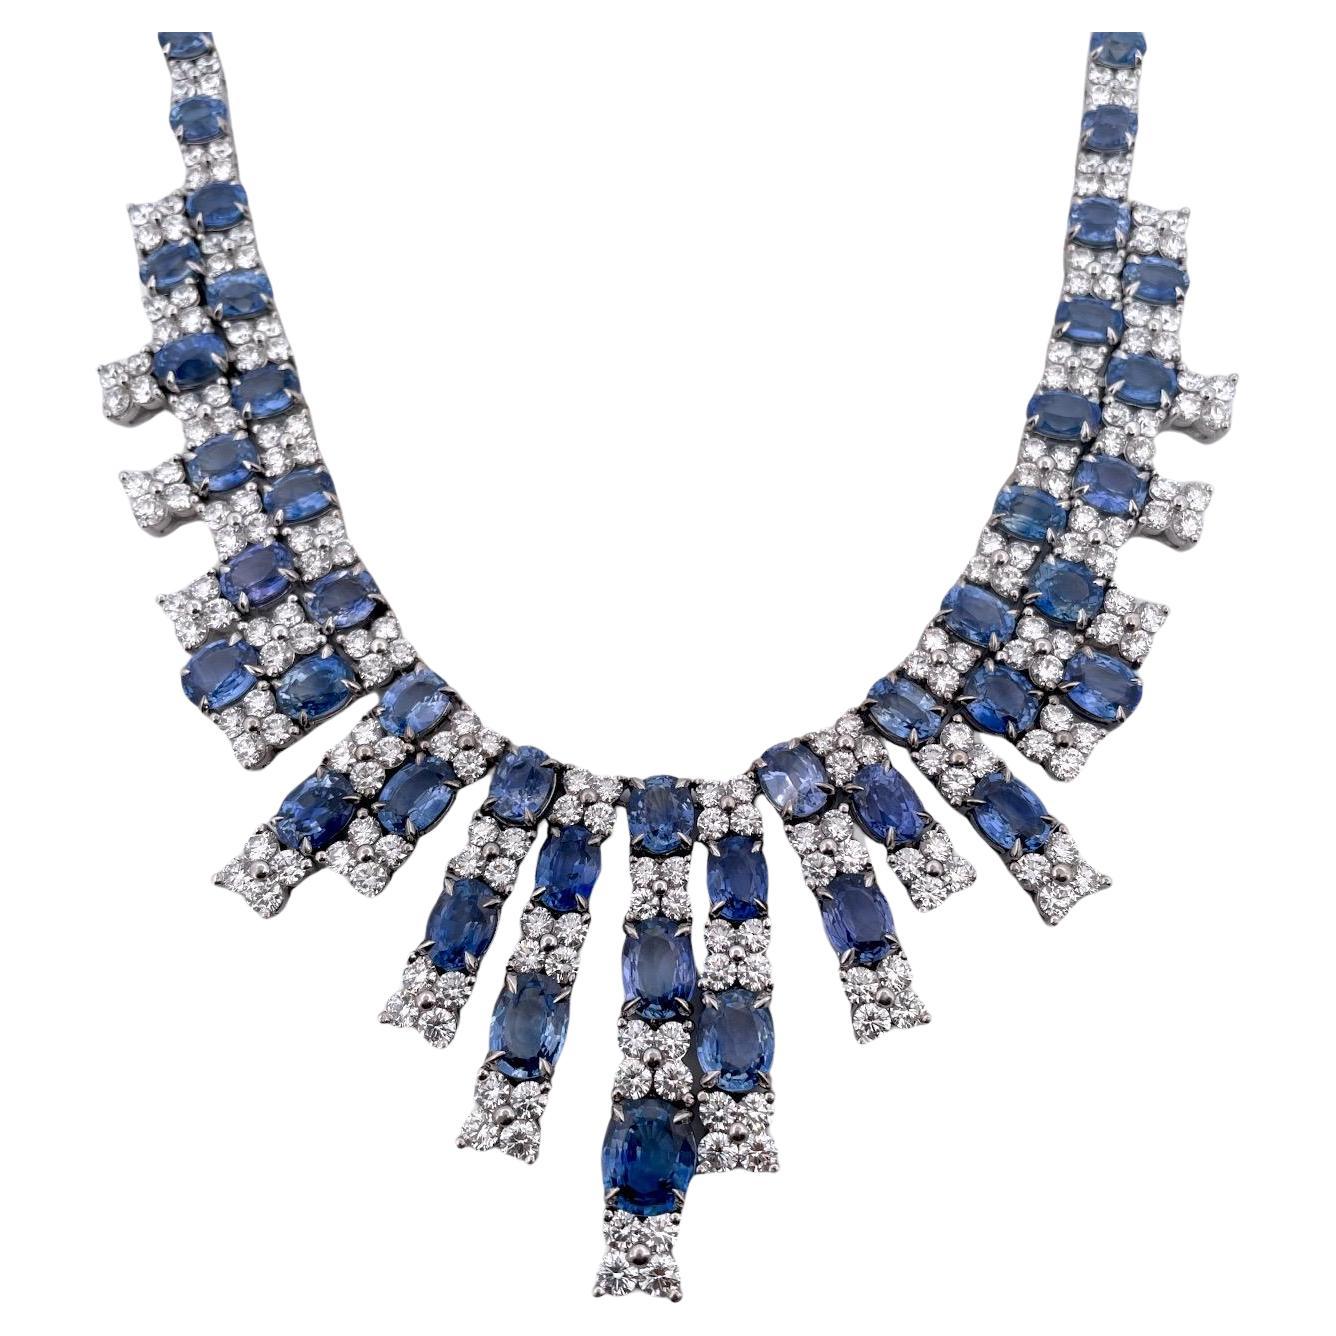 Blue Sapphire Necklace - Oval 89.60 Carat. - 18K White Gold For Sale